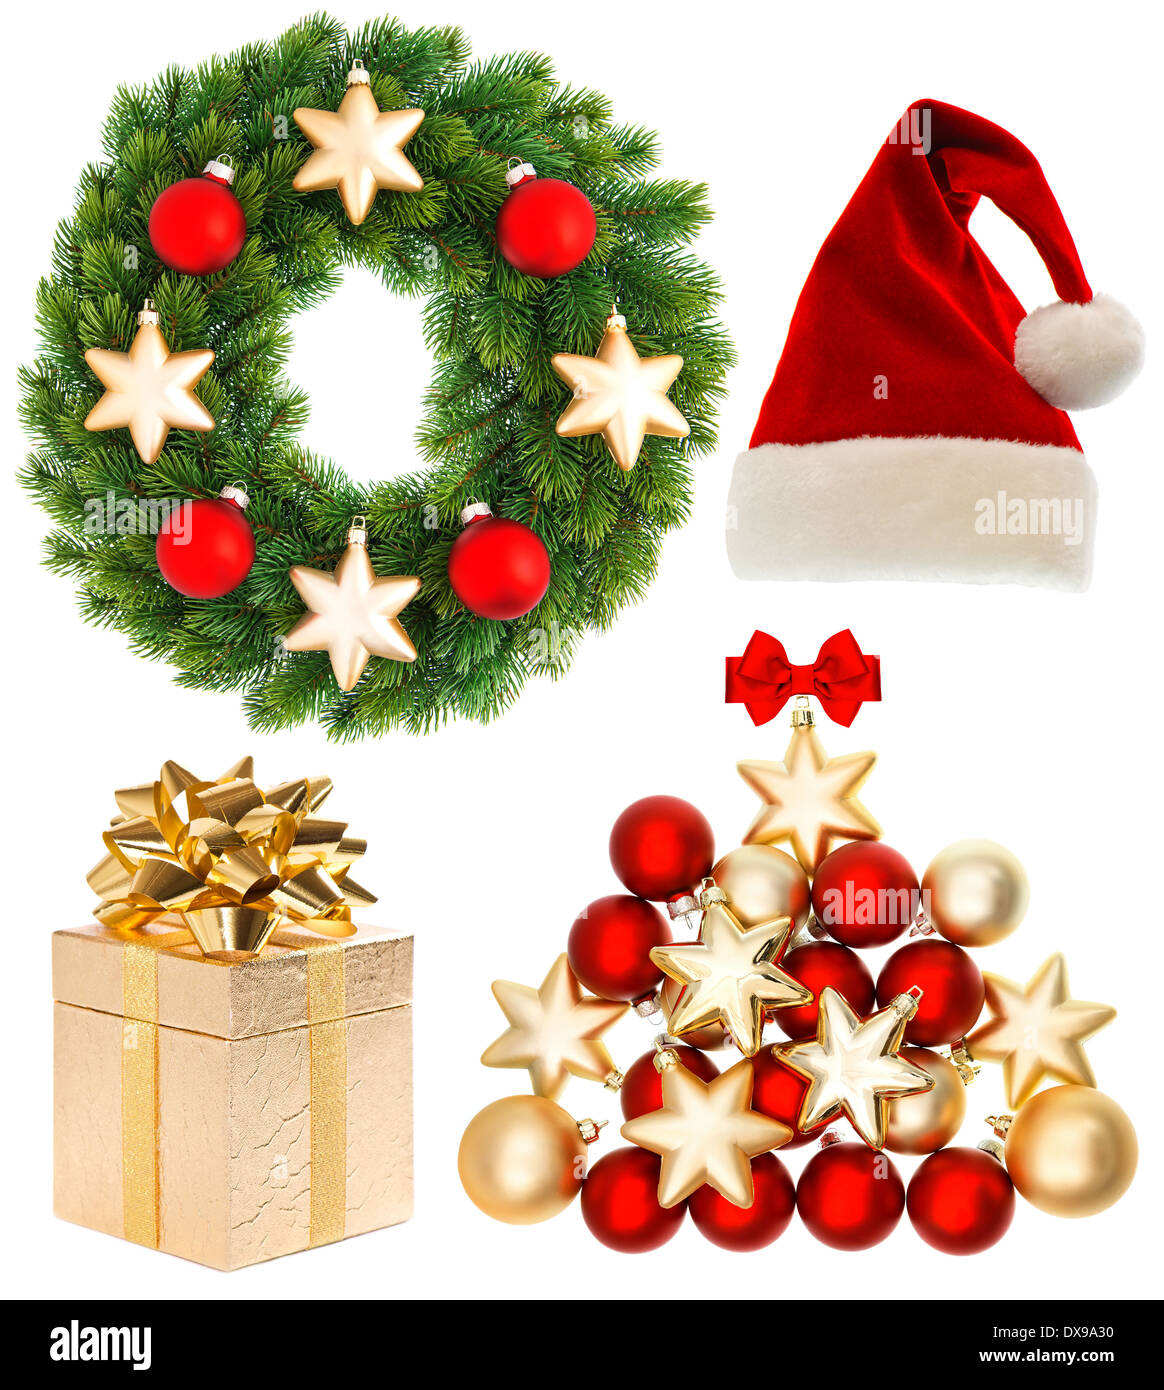 Christmas collection isolated on white background. Decoration items. Santa hat, gifts, baubles, wreath Stock Photo